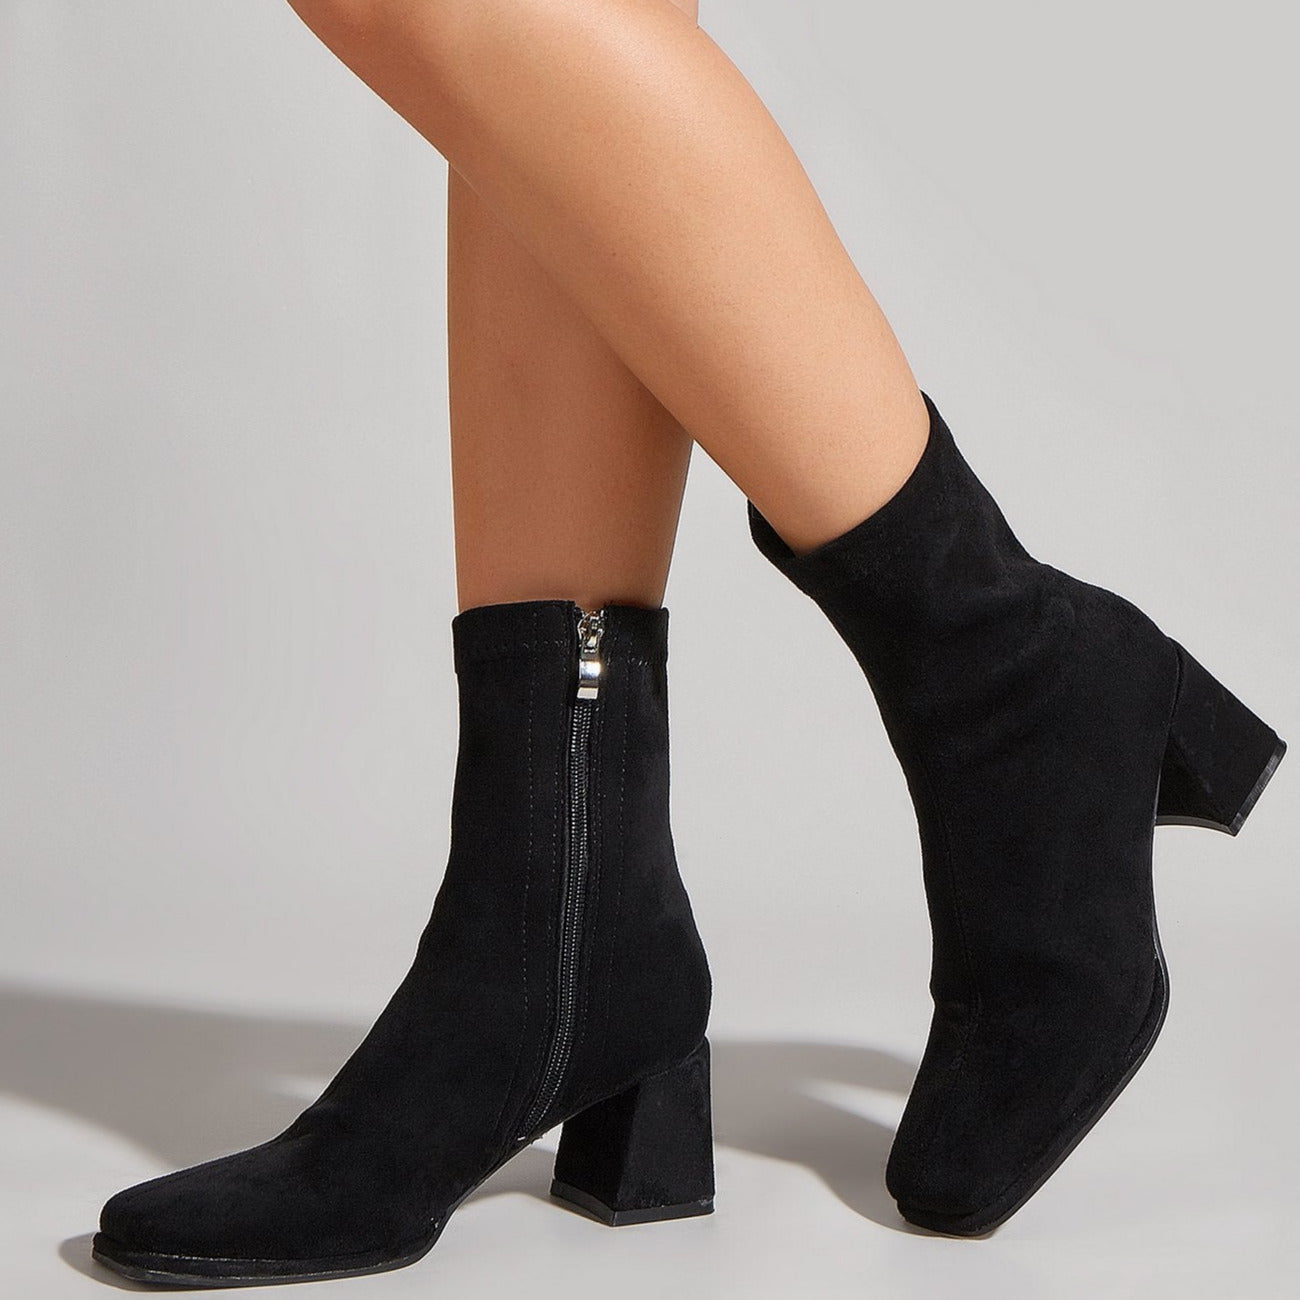 Retro Front Lace-up Square Heel Boots Newgew